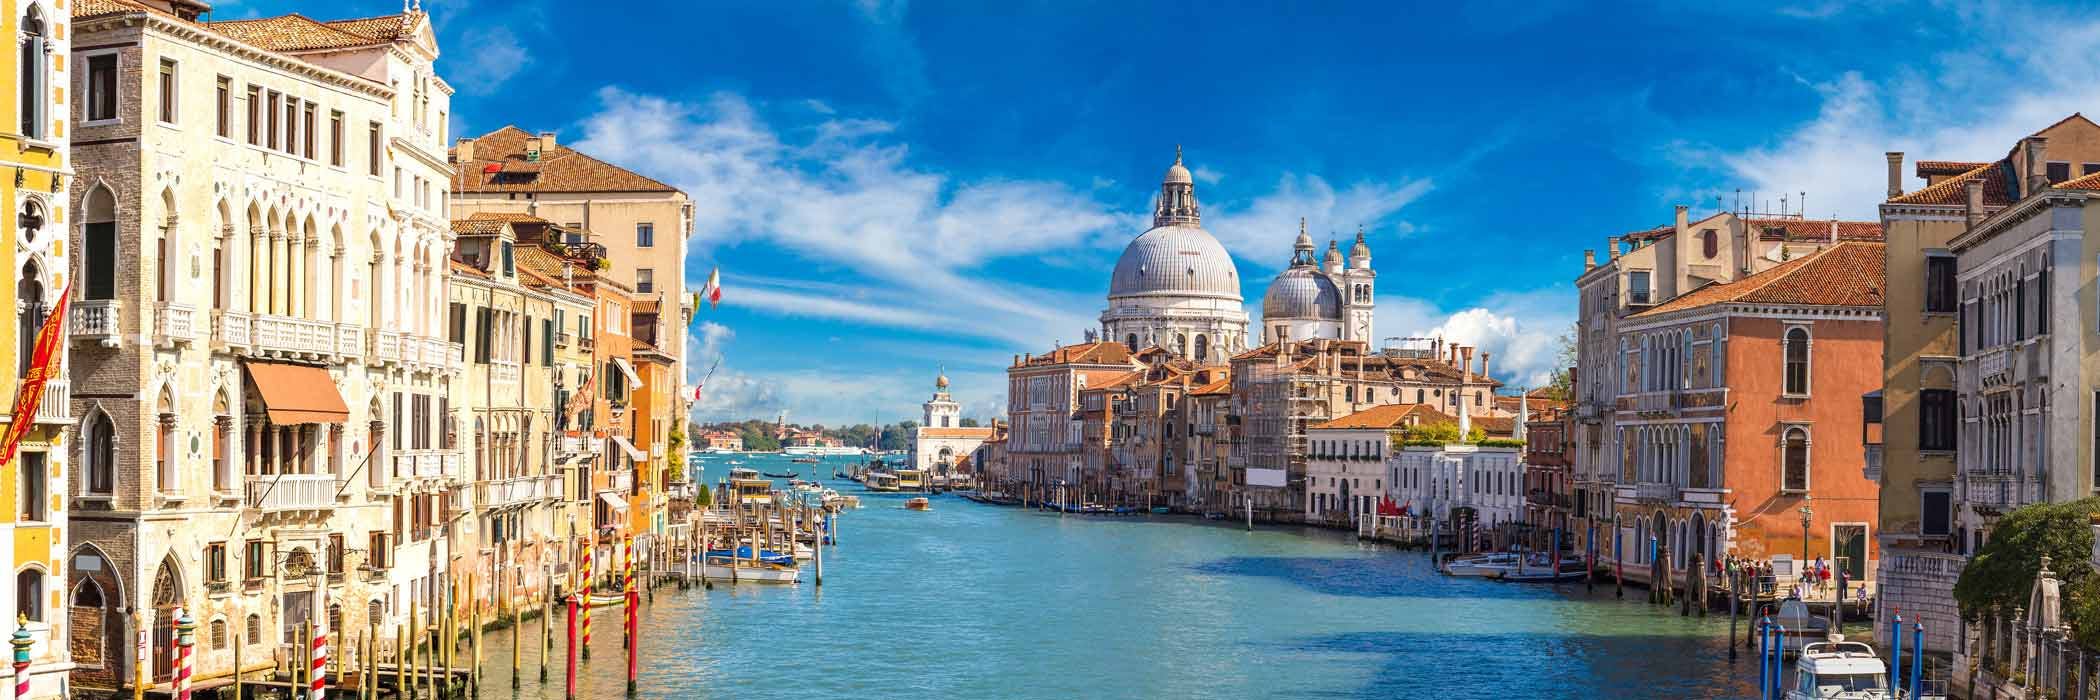 Venice - Hotels in Italy